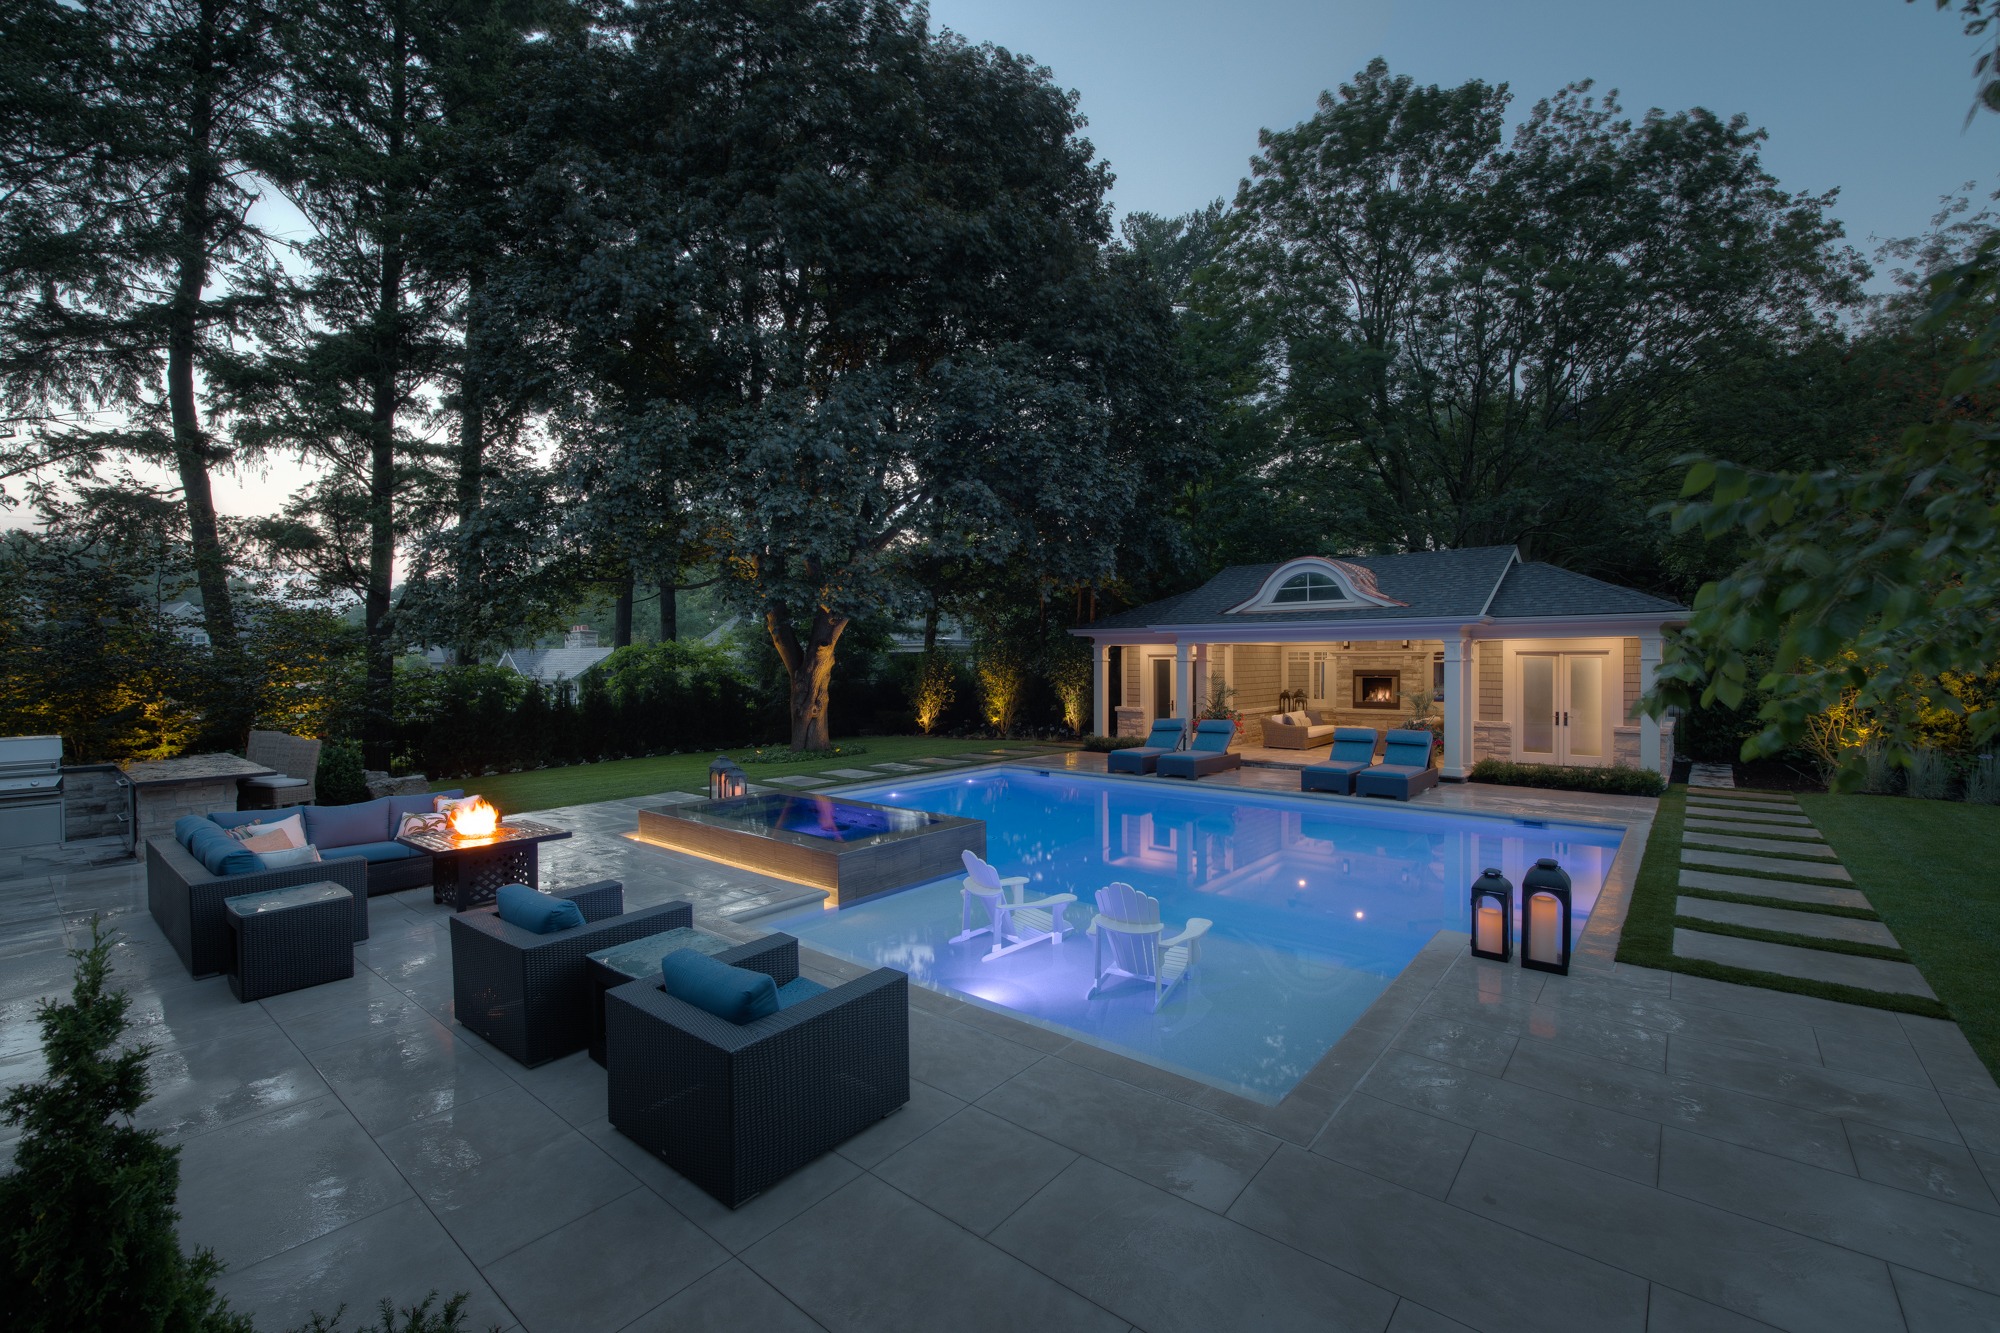 Luxurious backyard with a lit swimming pool at dusk. Outdoor seating, fire pit, and a pool house surrounded by trees provide a tranquil setting.